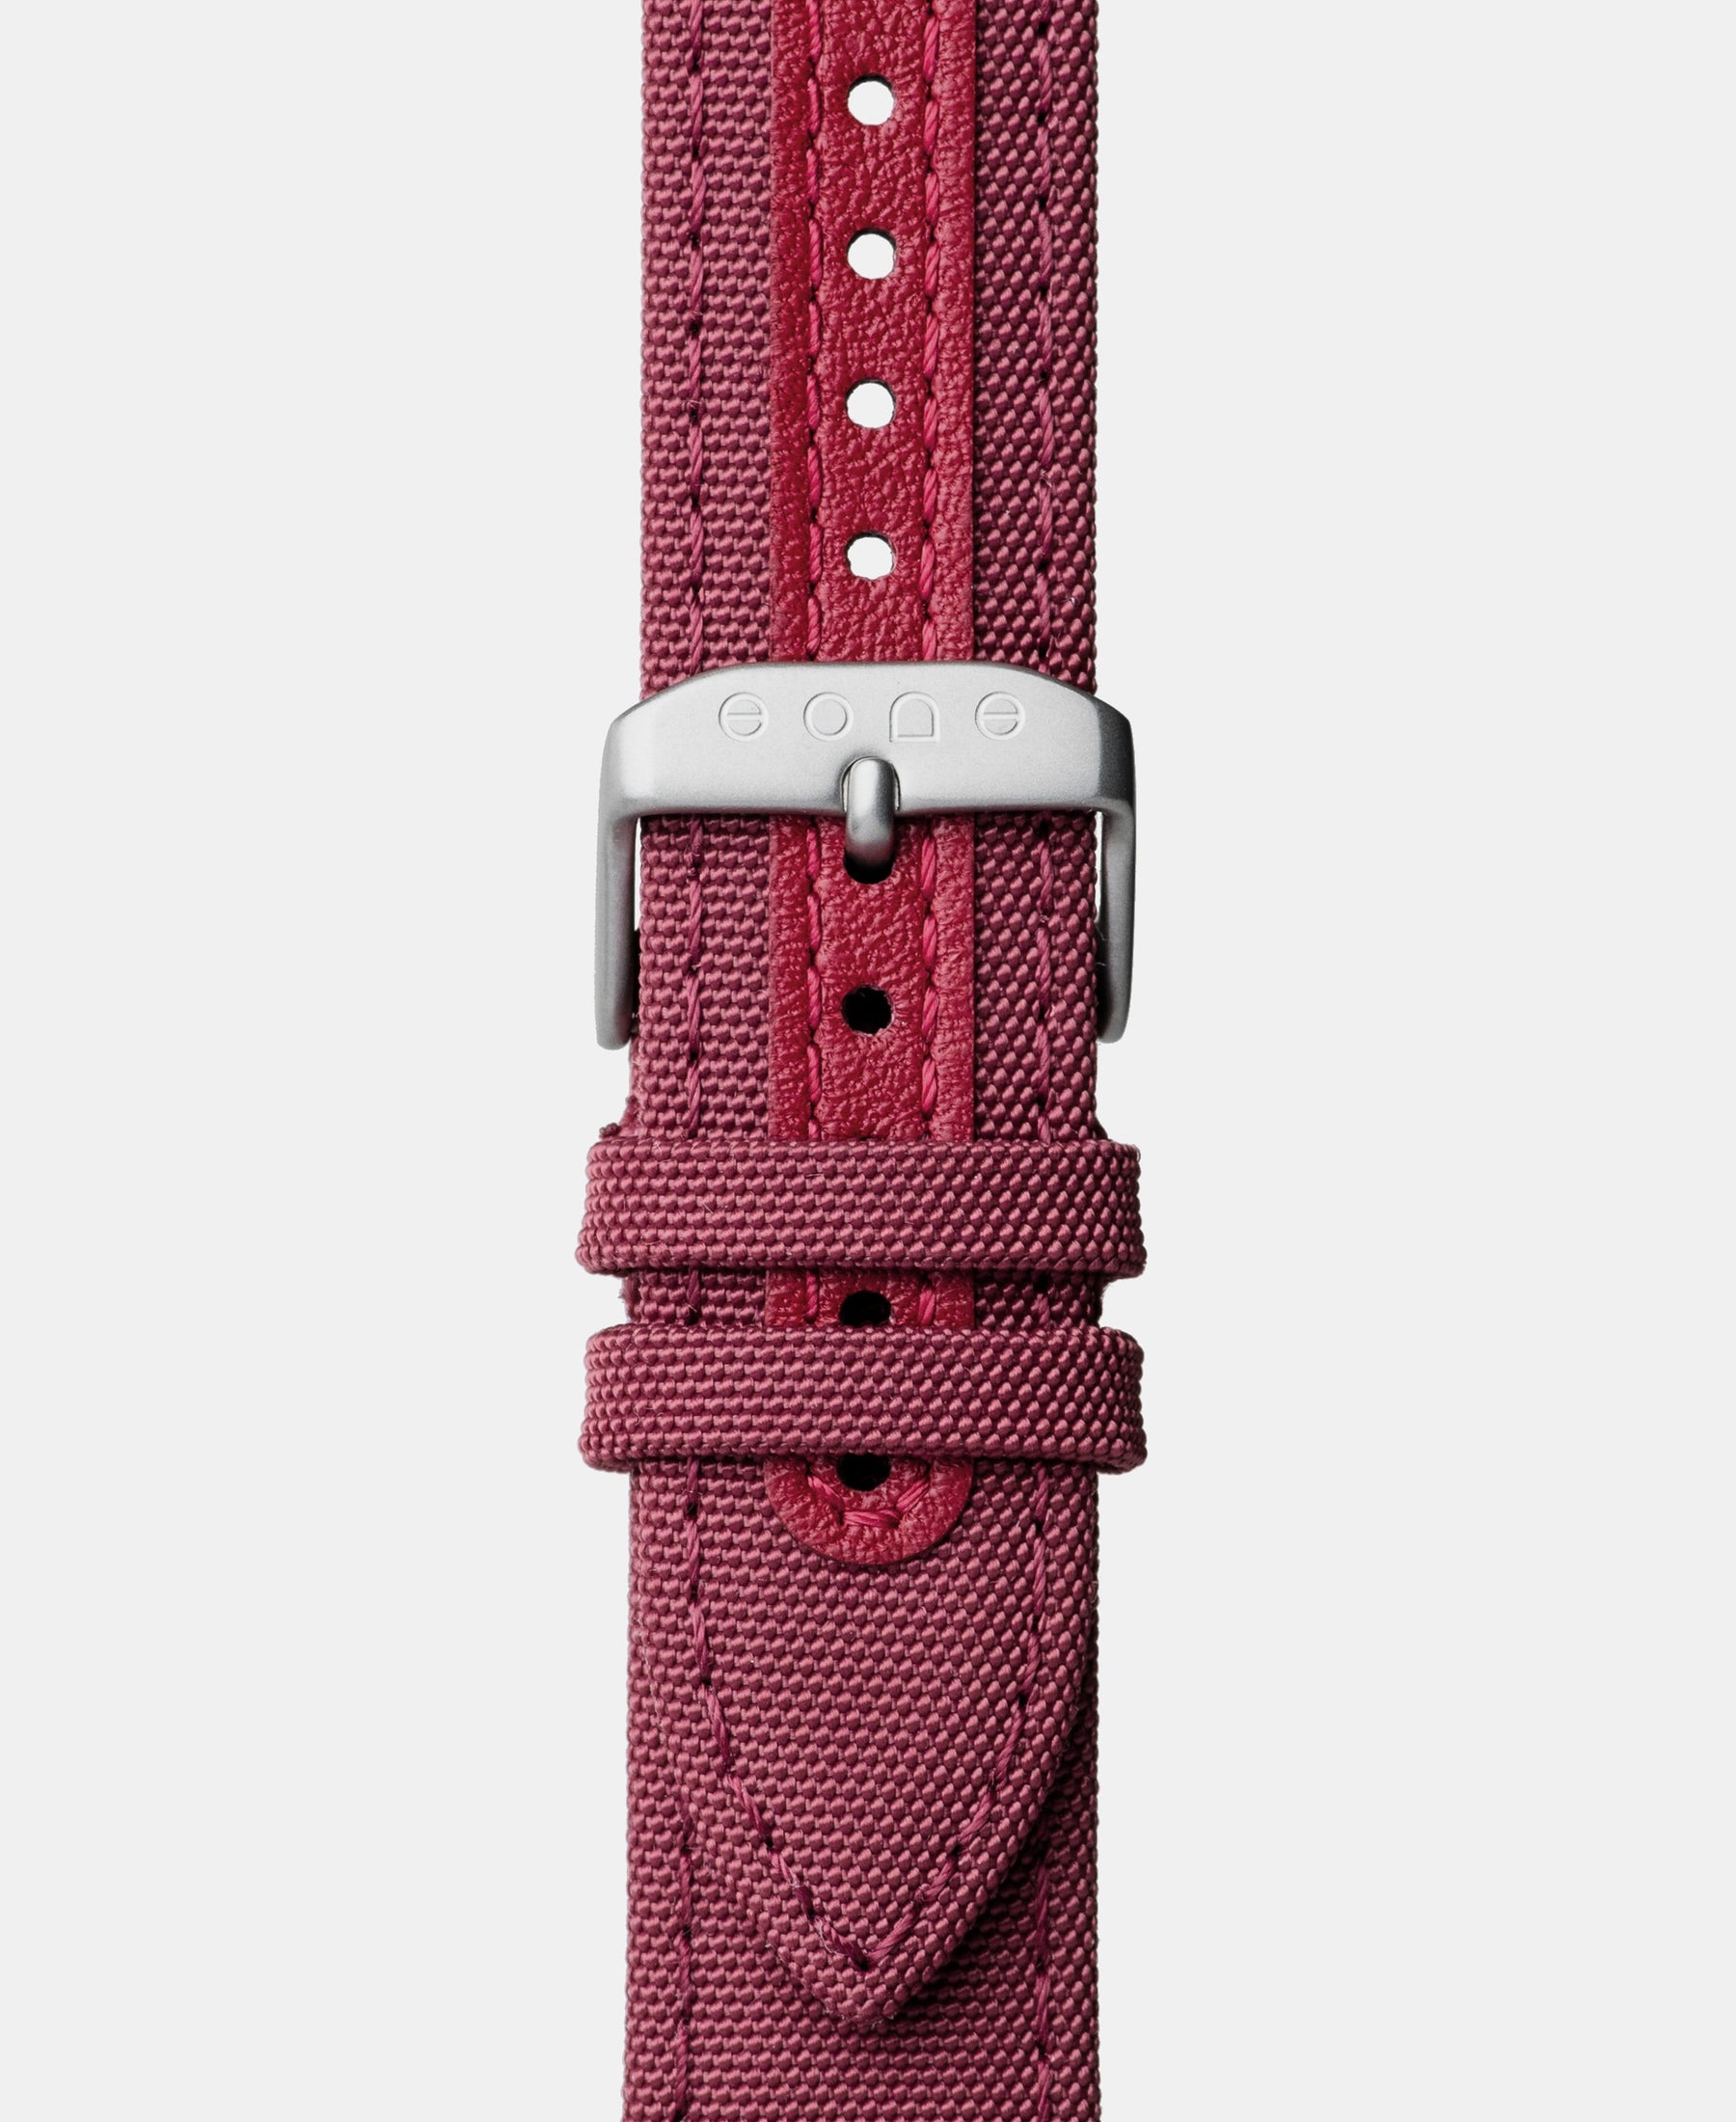 Load image into Gallery viewer, A photo shows the strap lying on a flat surface. One part has a buckle and the other part has a series of holes for an adjustable fit.